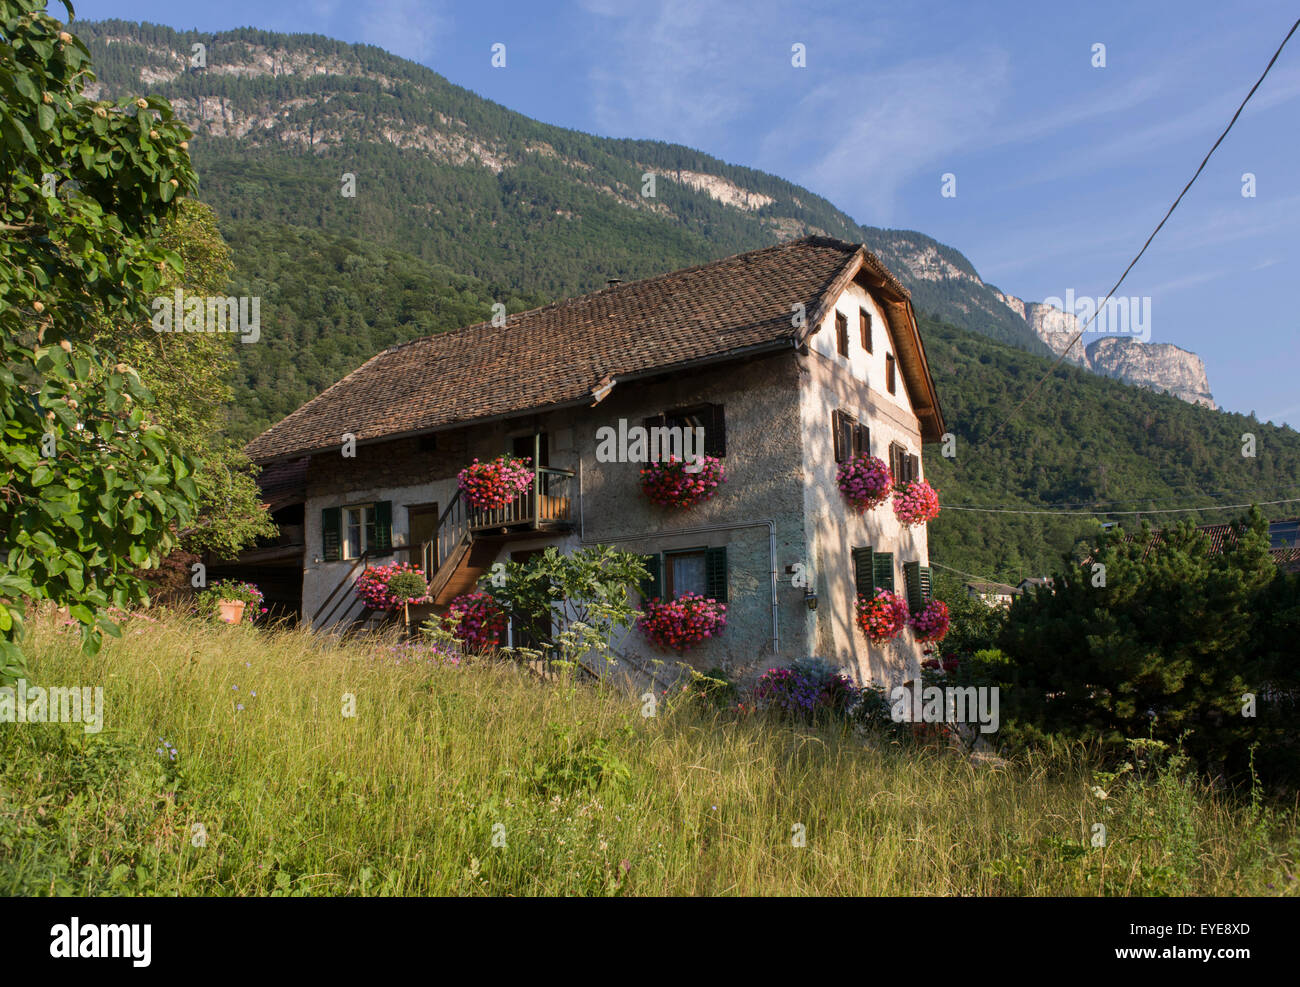 German architecture in Italian South Tyrolean agricultural region, south-west of Bolzano, northern Italy. Stock Photo